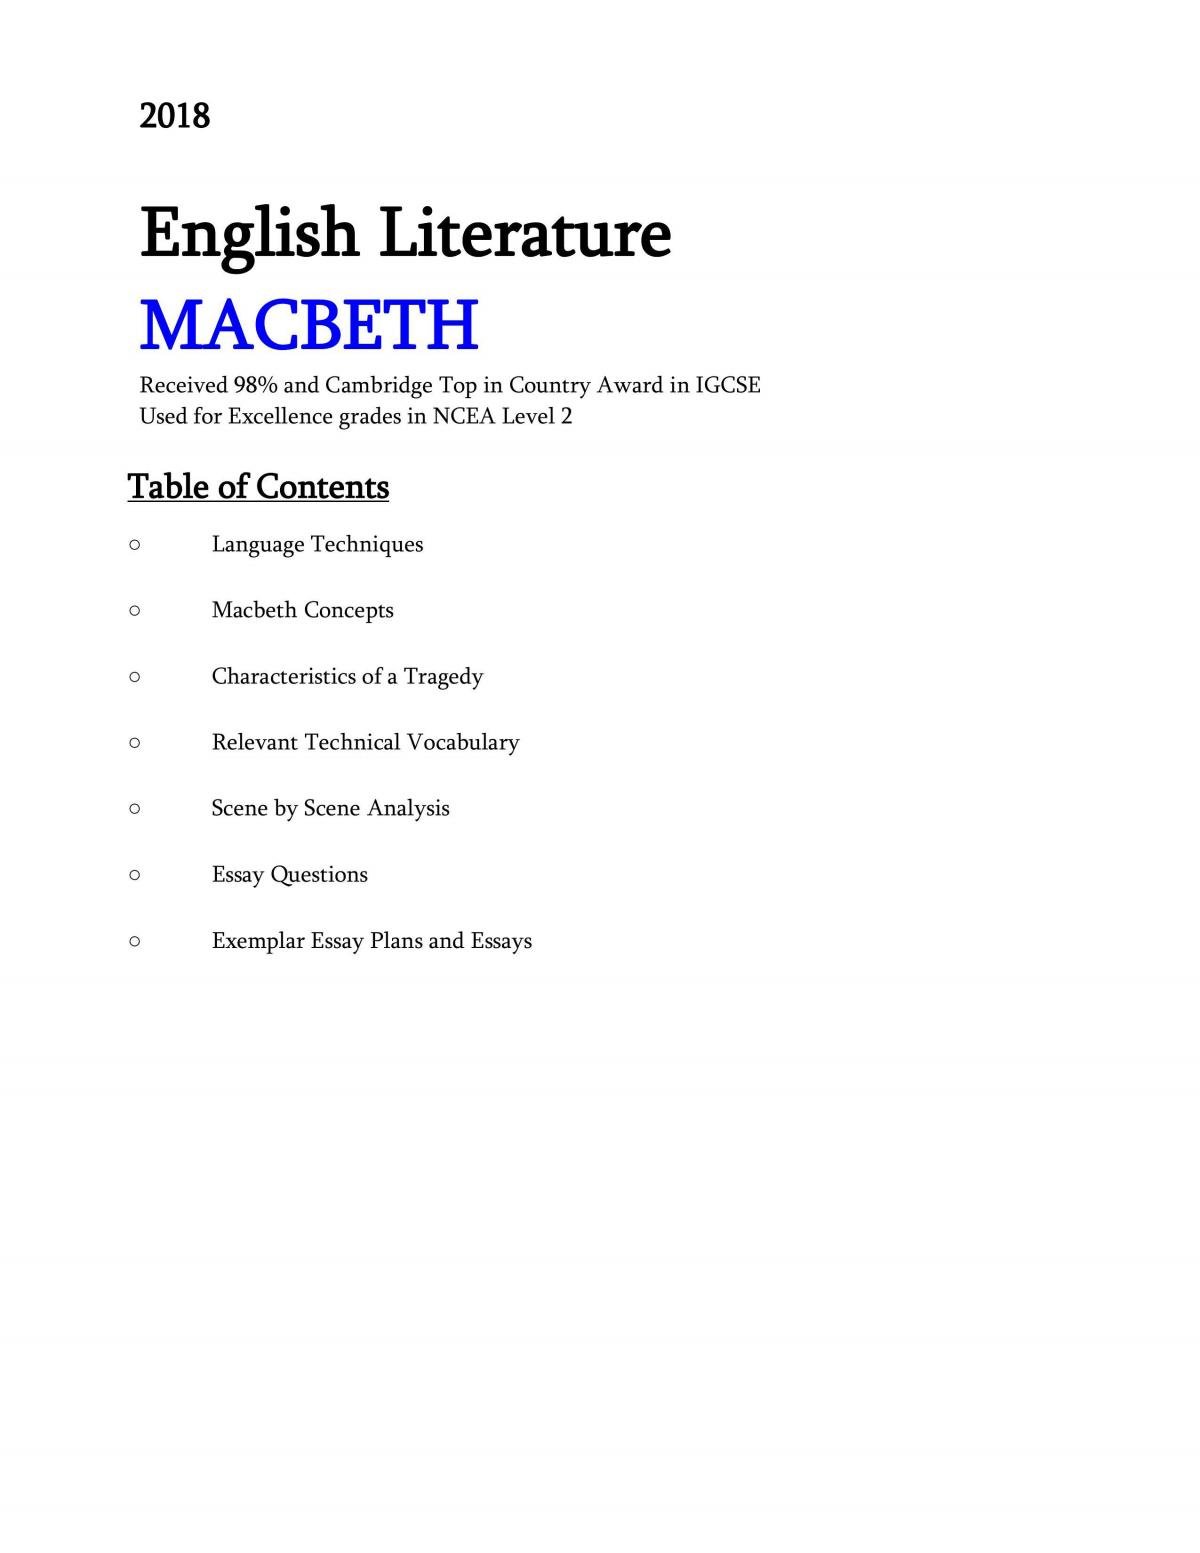 Macbeth NCEA Level 2 Written Text Full study notes - Page 1